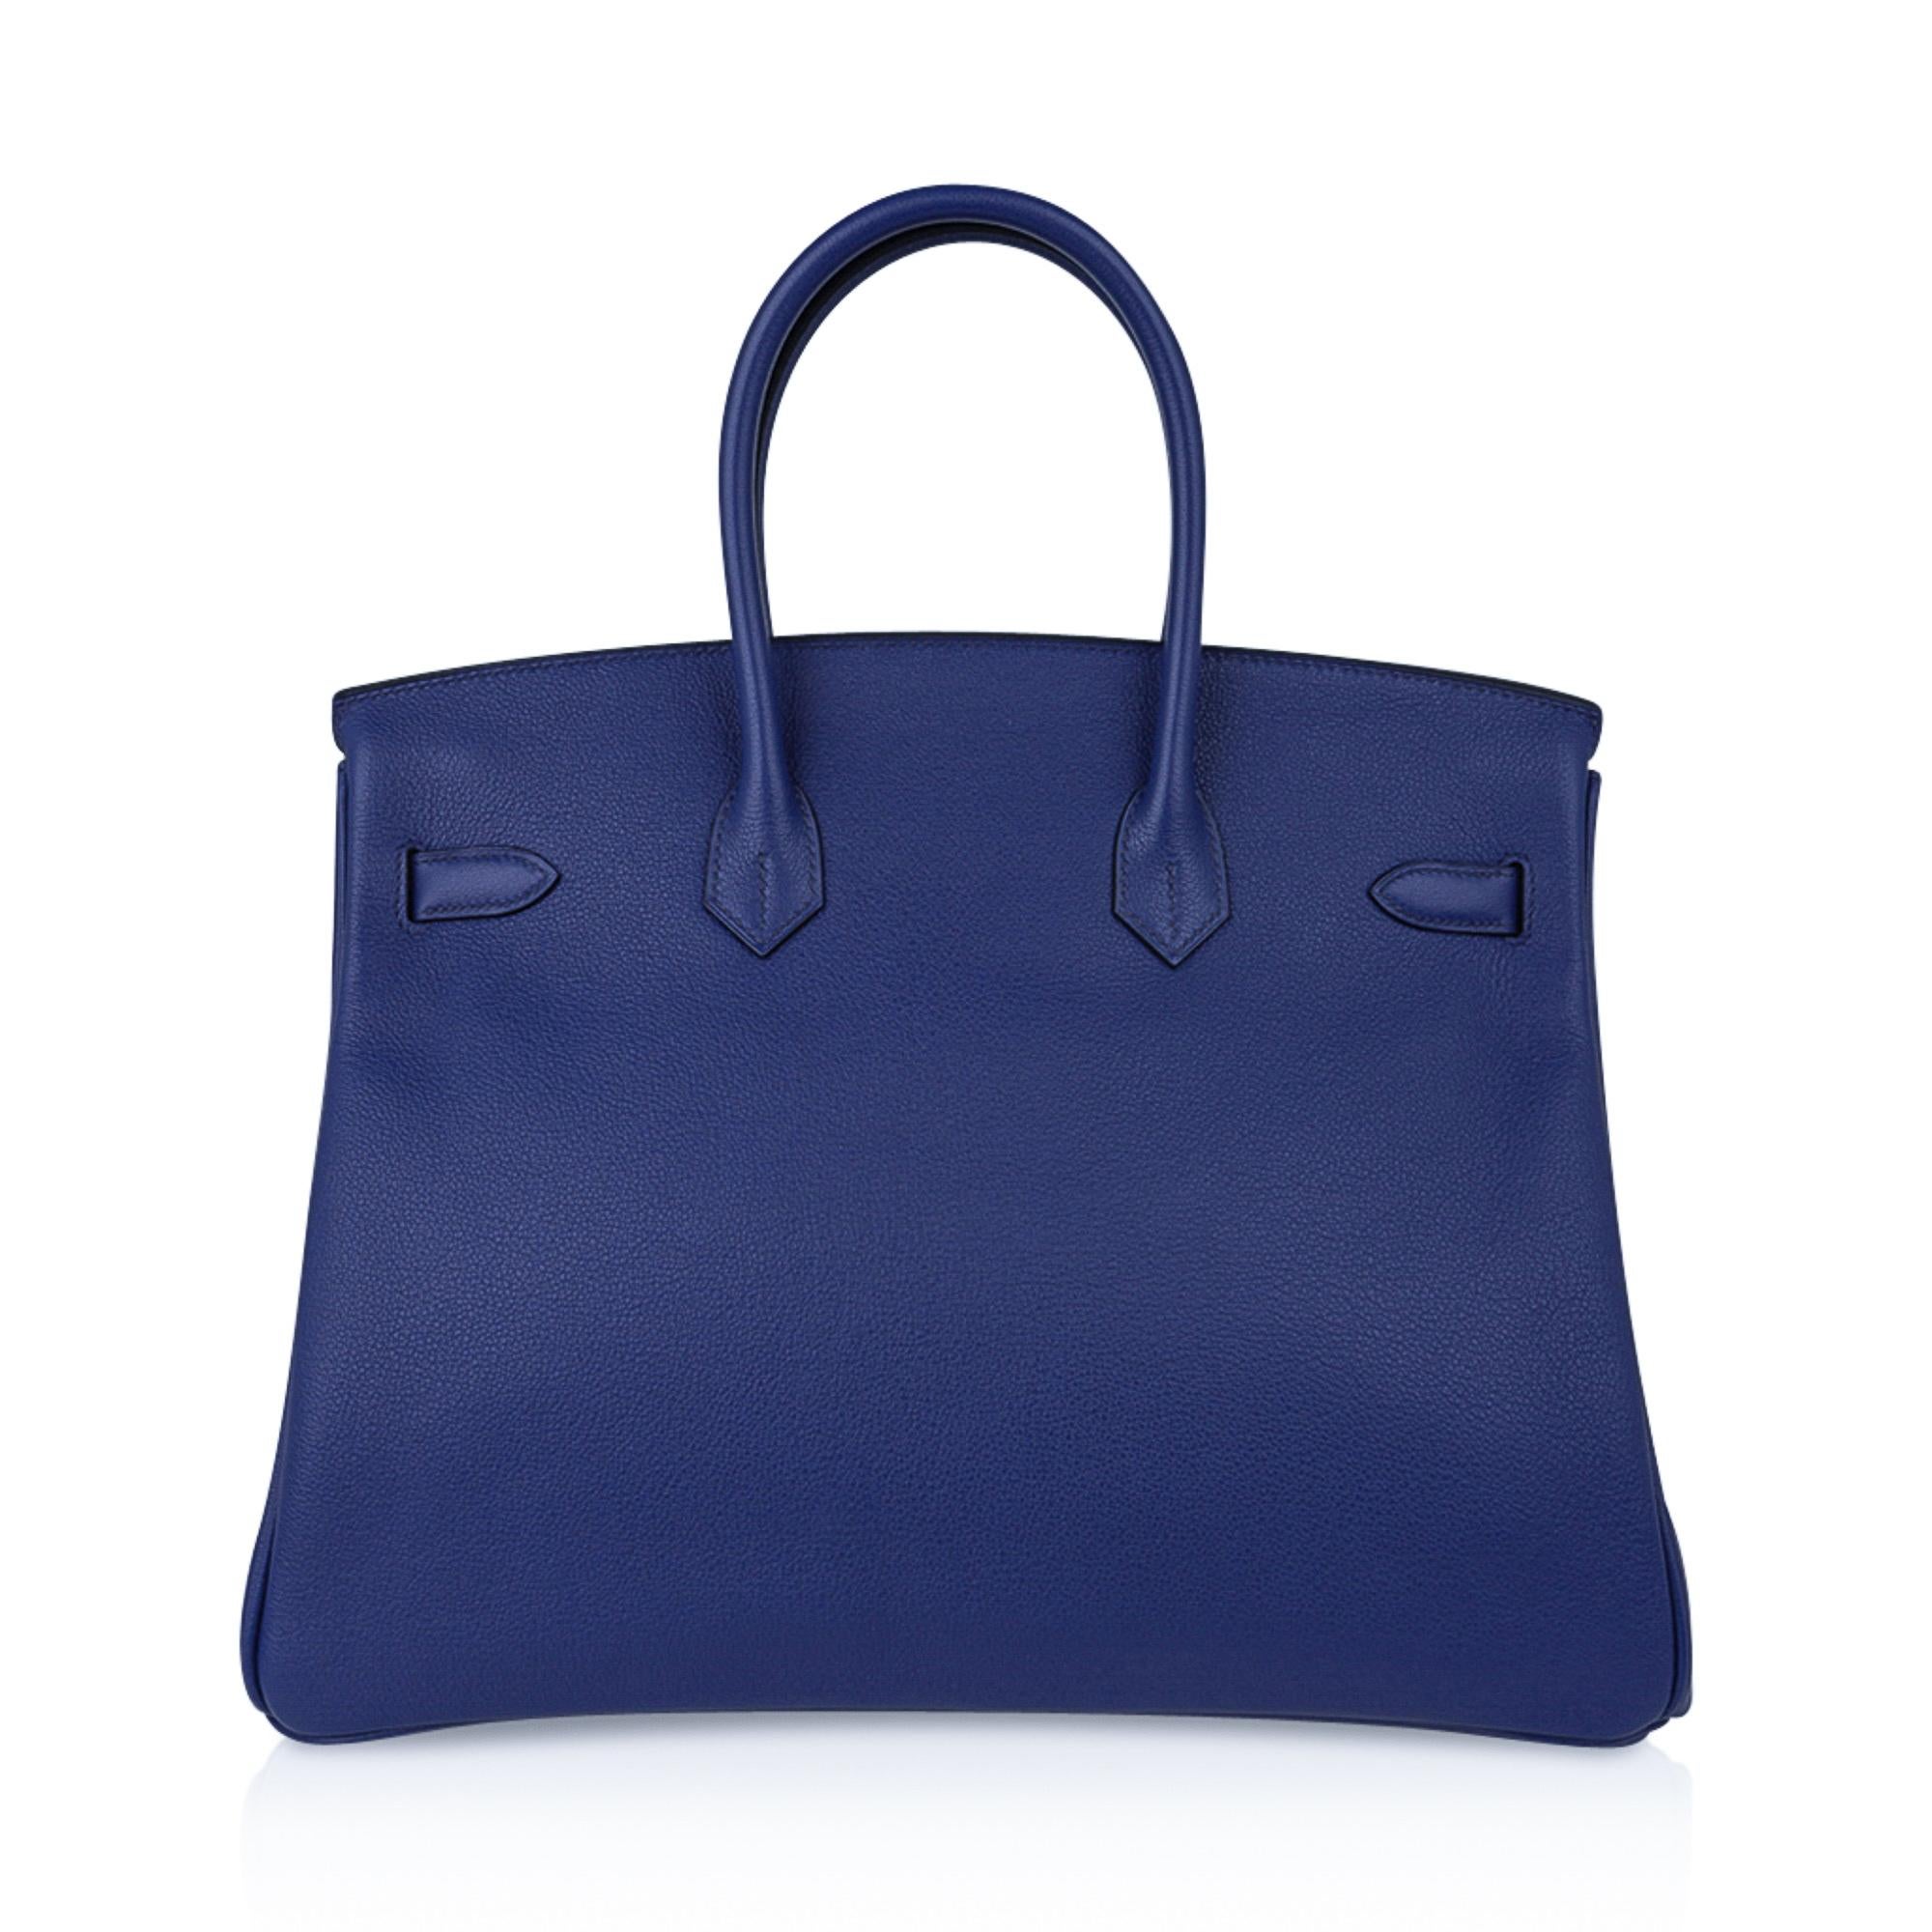 Hermes Birkin 35 Blue Sapphire Limited Edition Toile Printed Sea Surf Bag For Sale 3